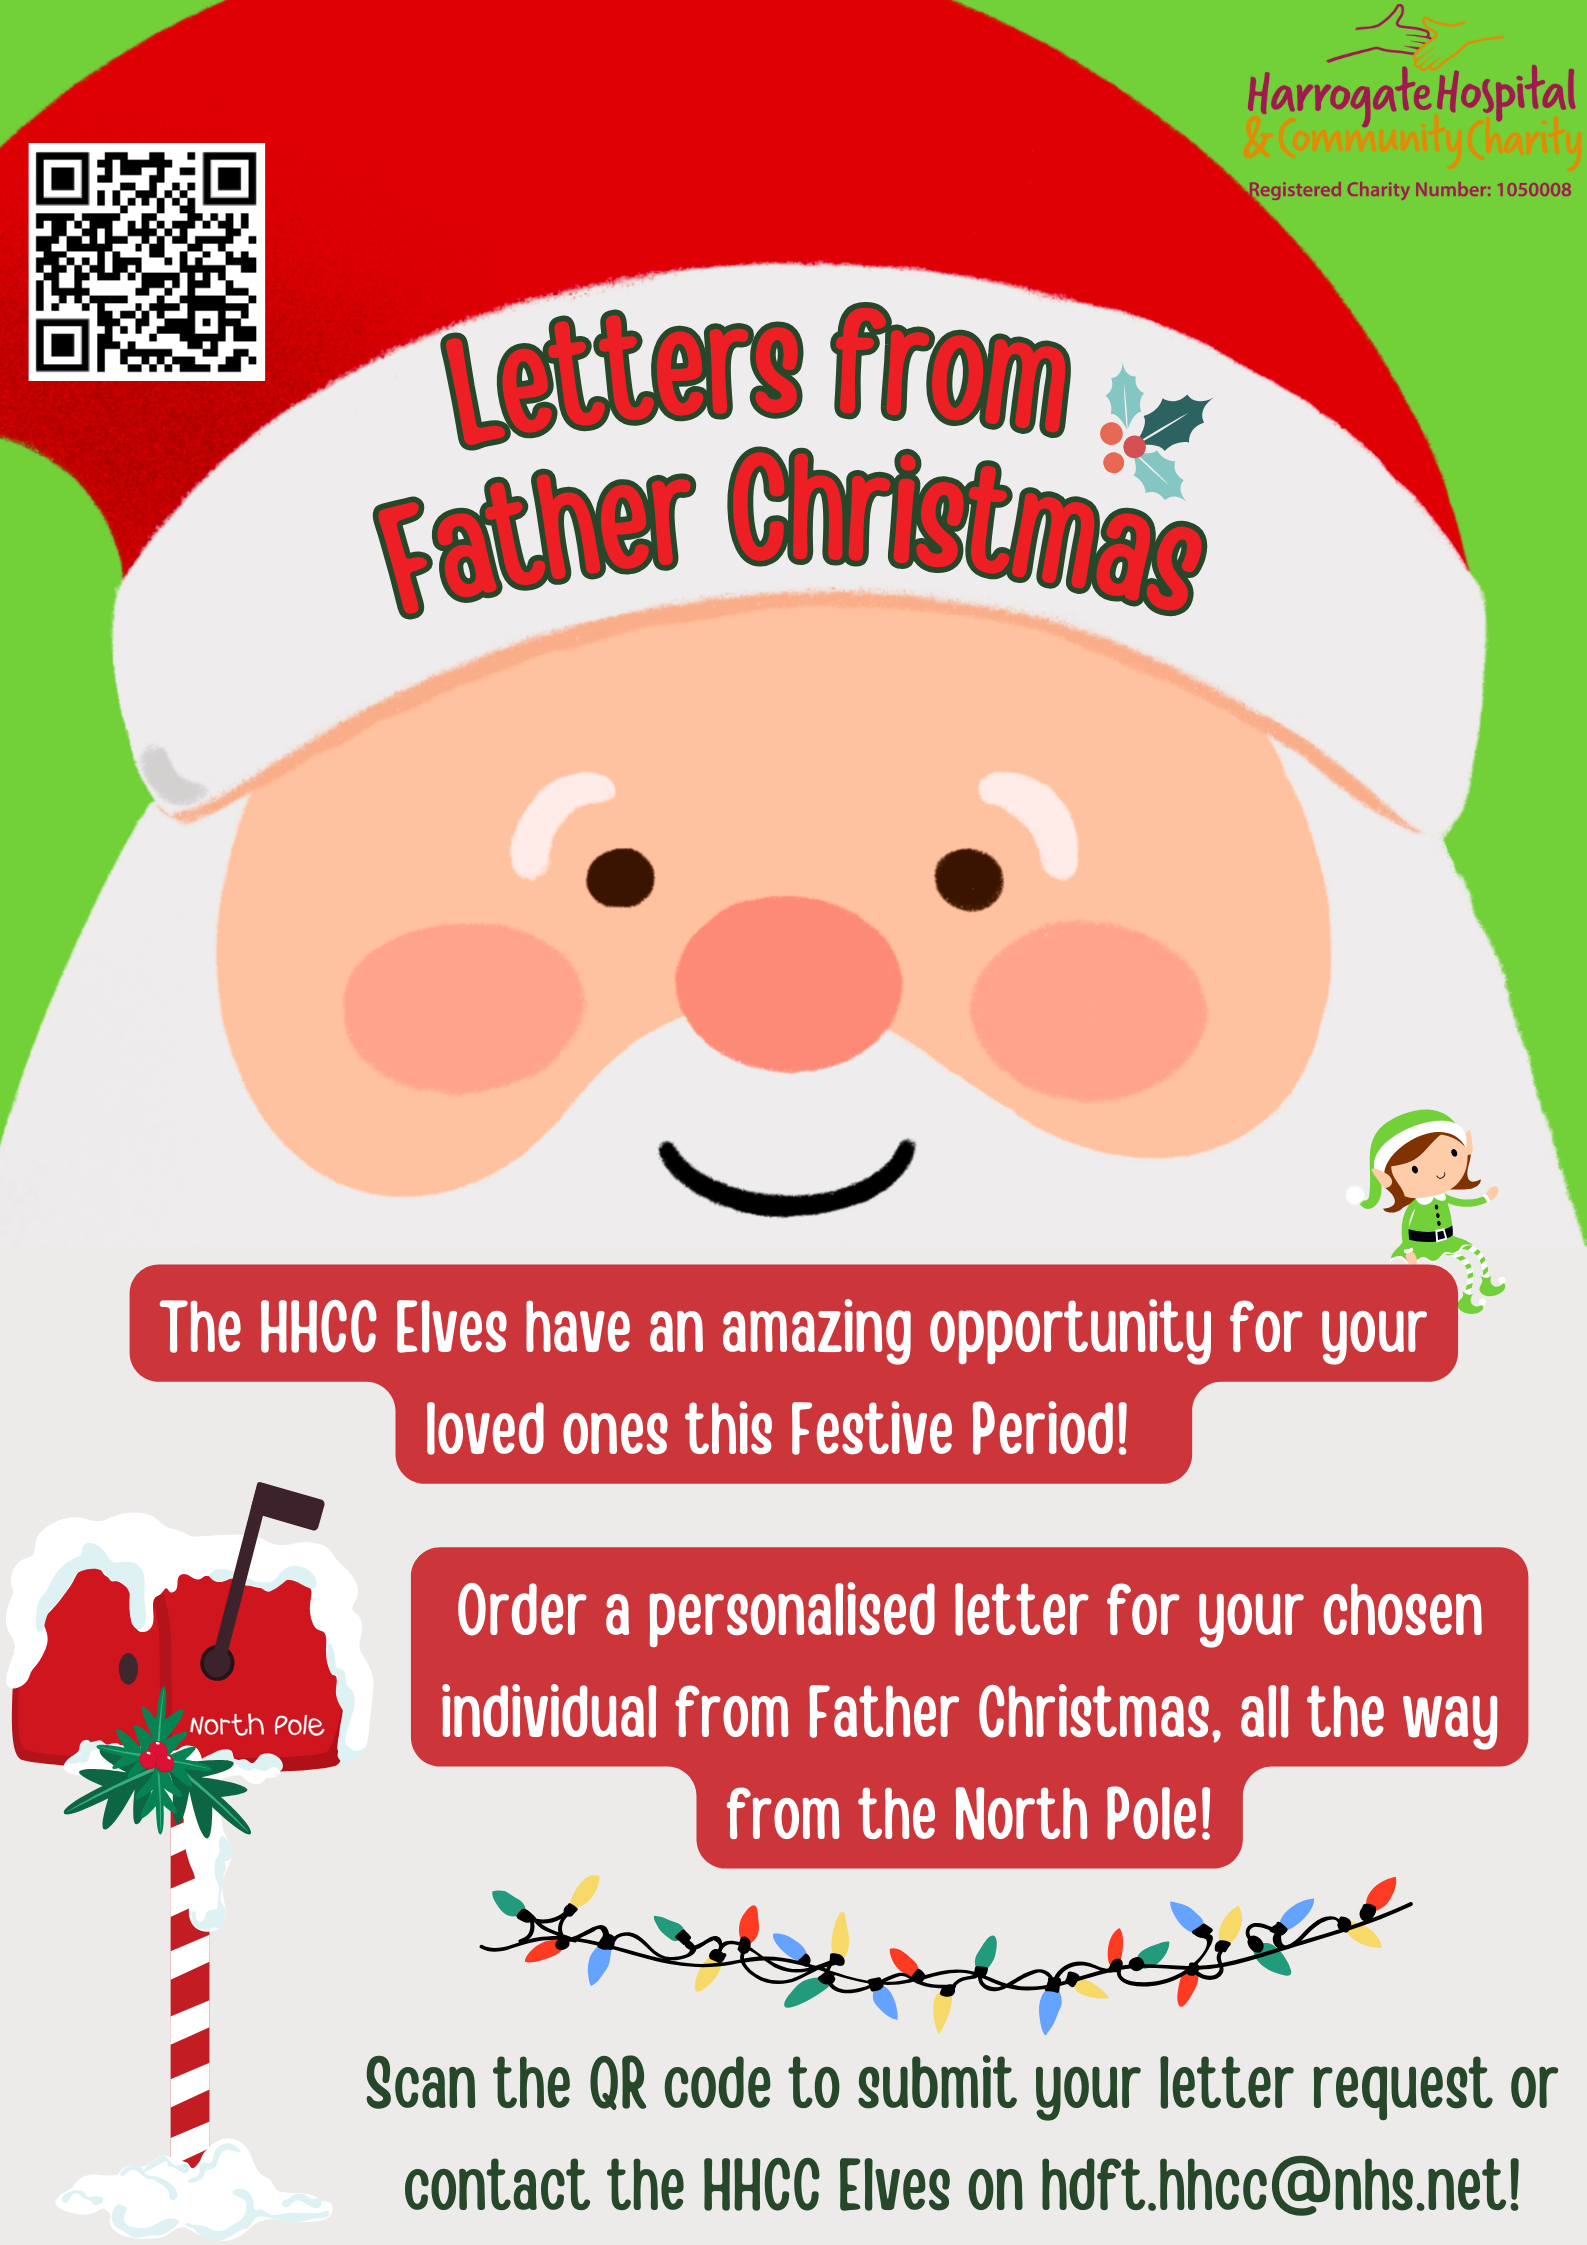 Letters from Father Christmas poster